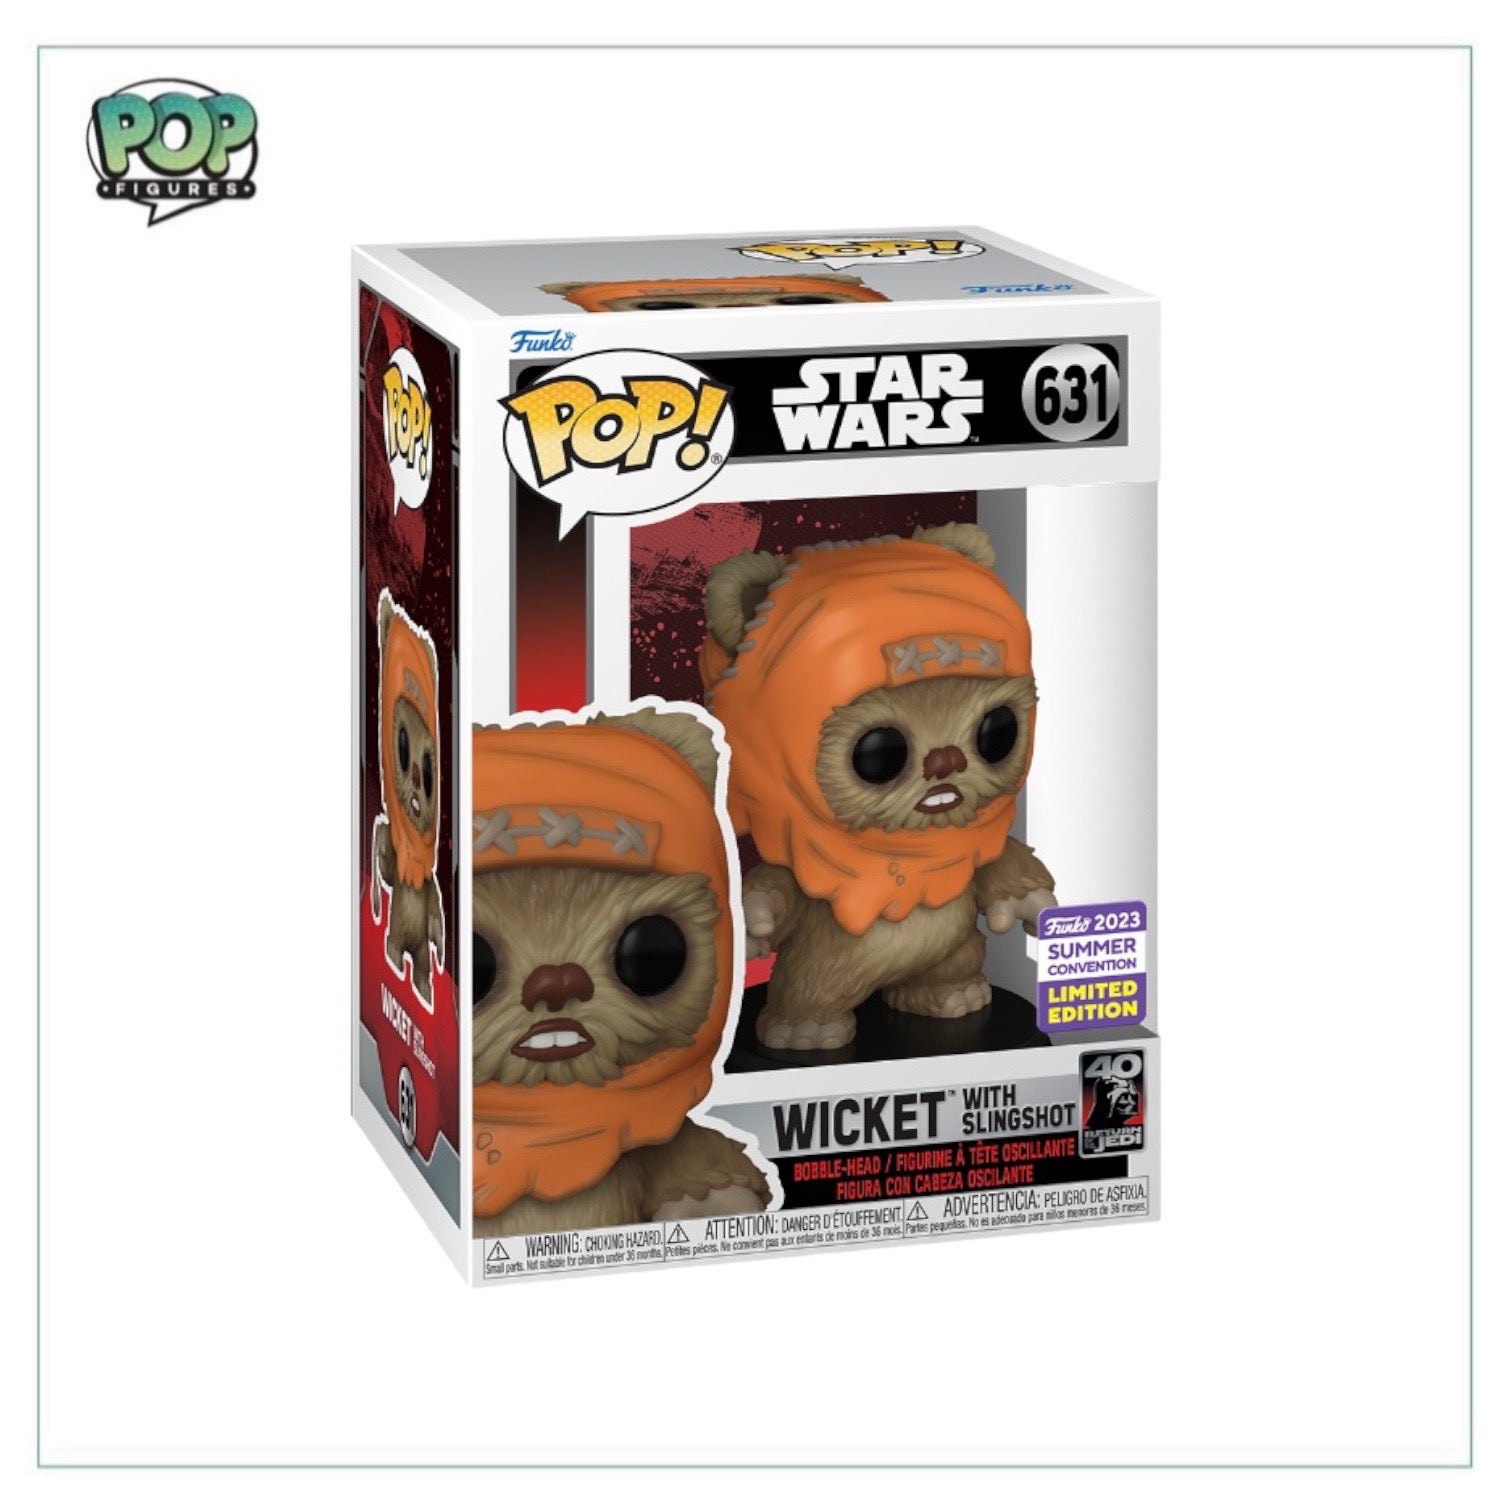 Wicket with Slingshot #631 Funko Pop! - Star Wars Return of The Jedi - SDCC 2023 Shared Exclusive